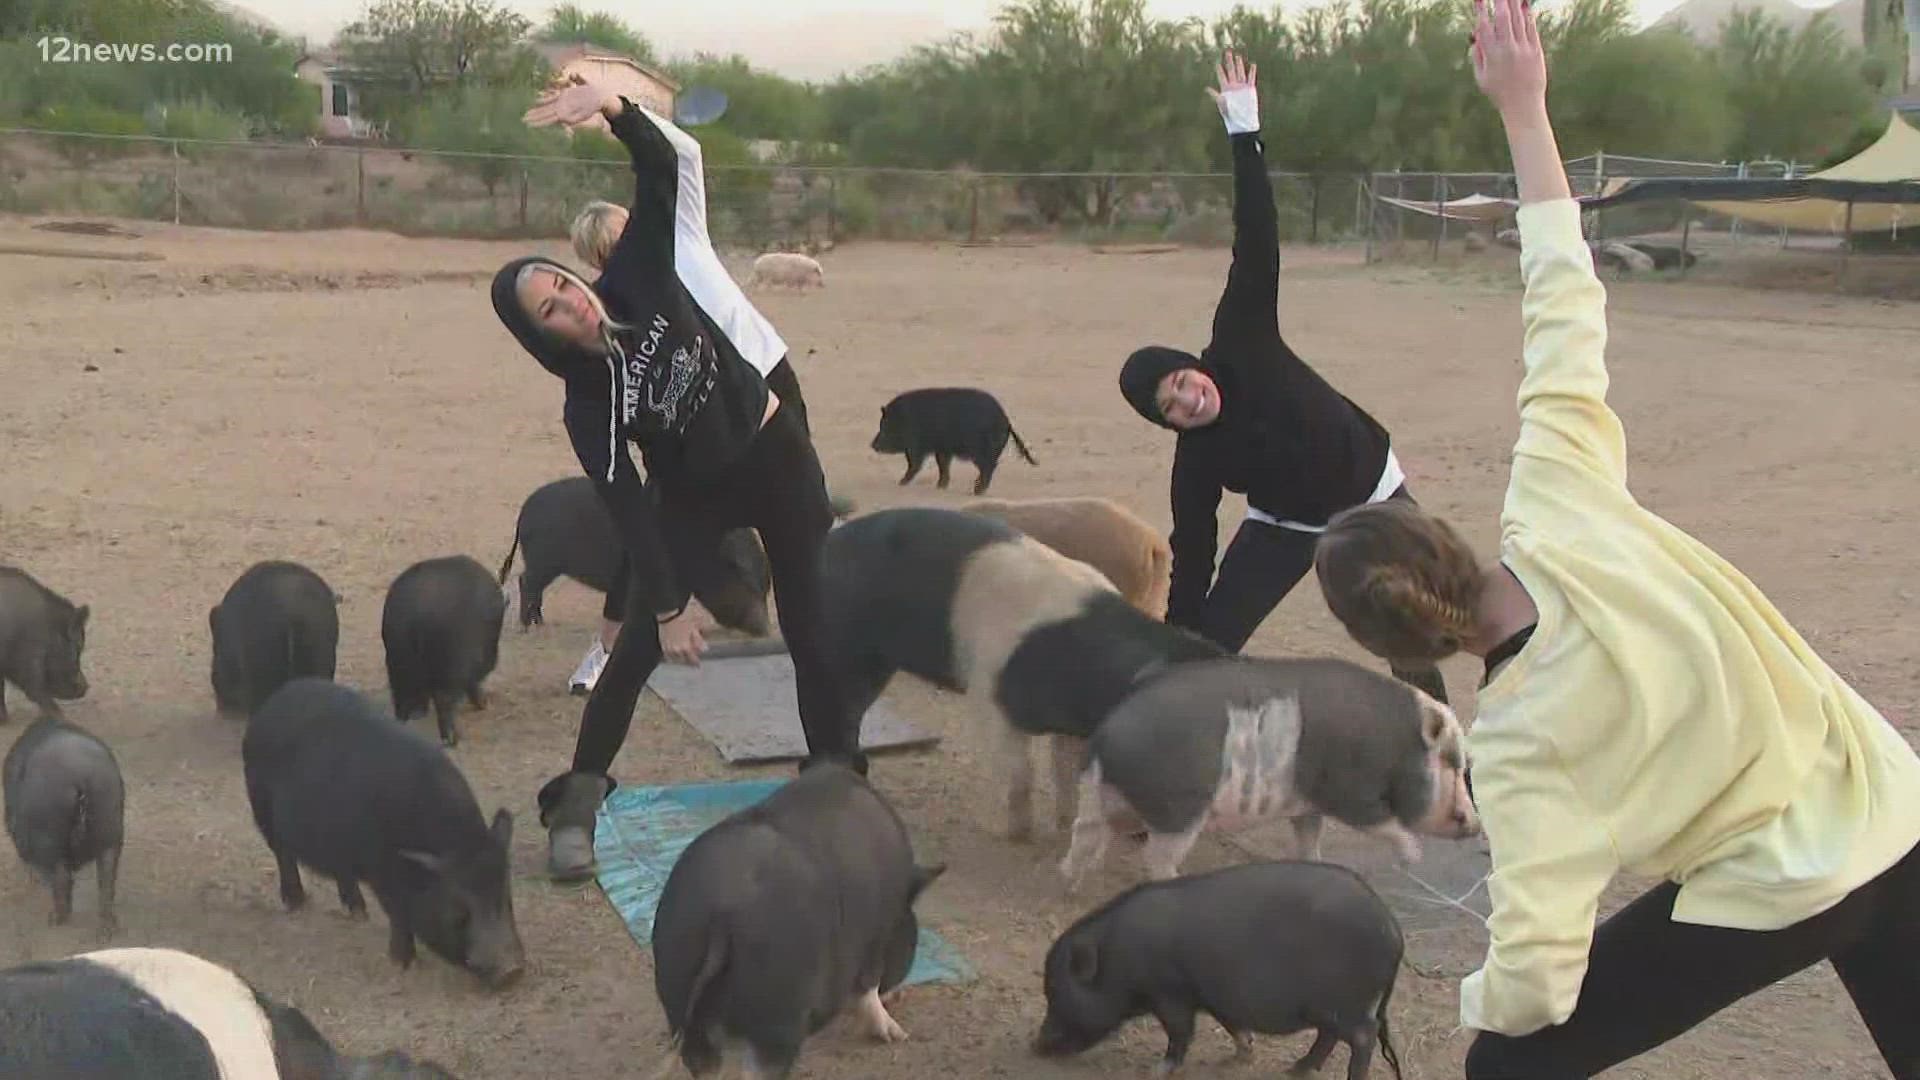 The rescue saw the success of goat yoga and they thought "Why not pigs?". Head over to BetterPiggiesRescue.org to sign up!